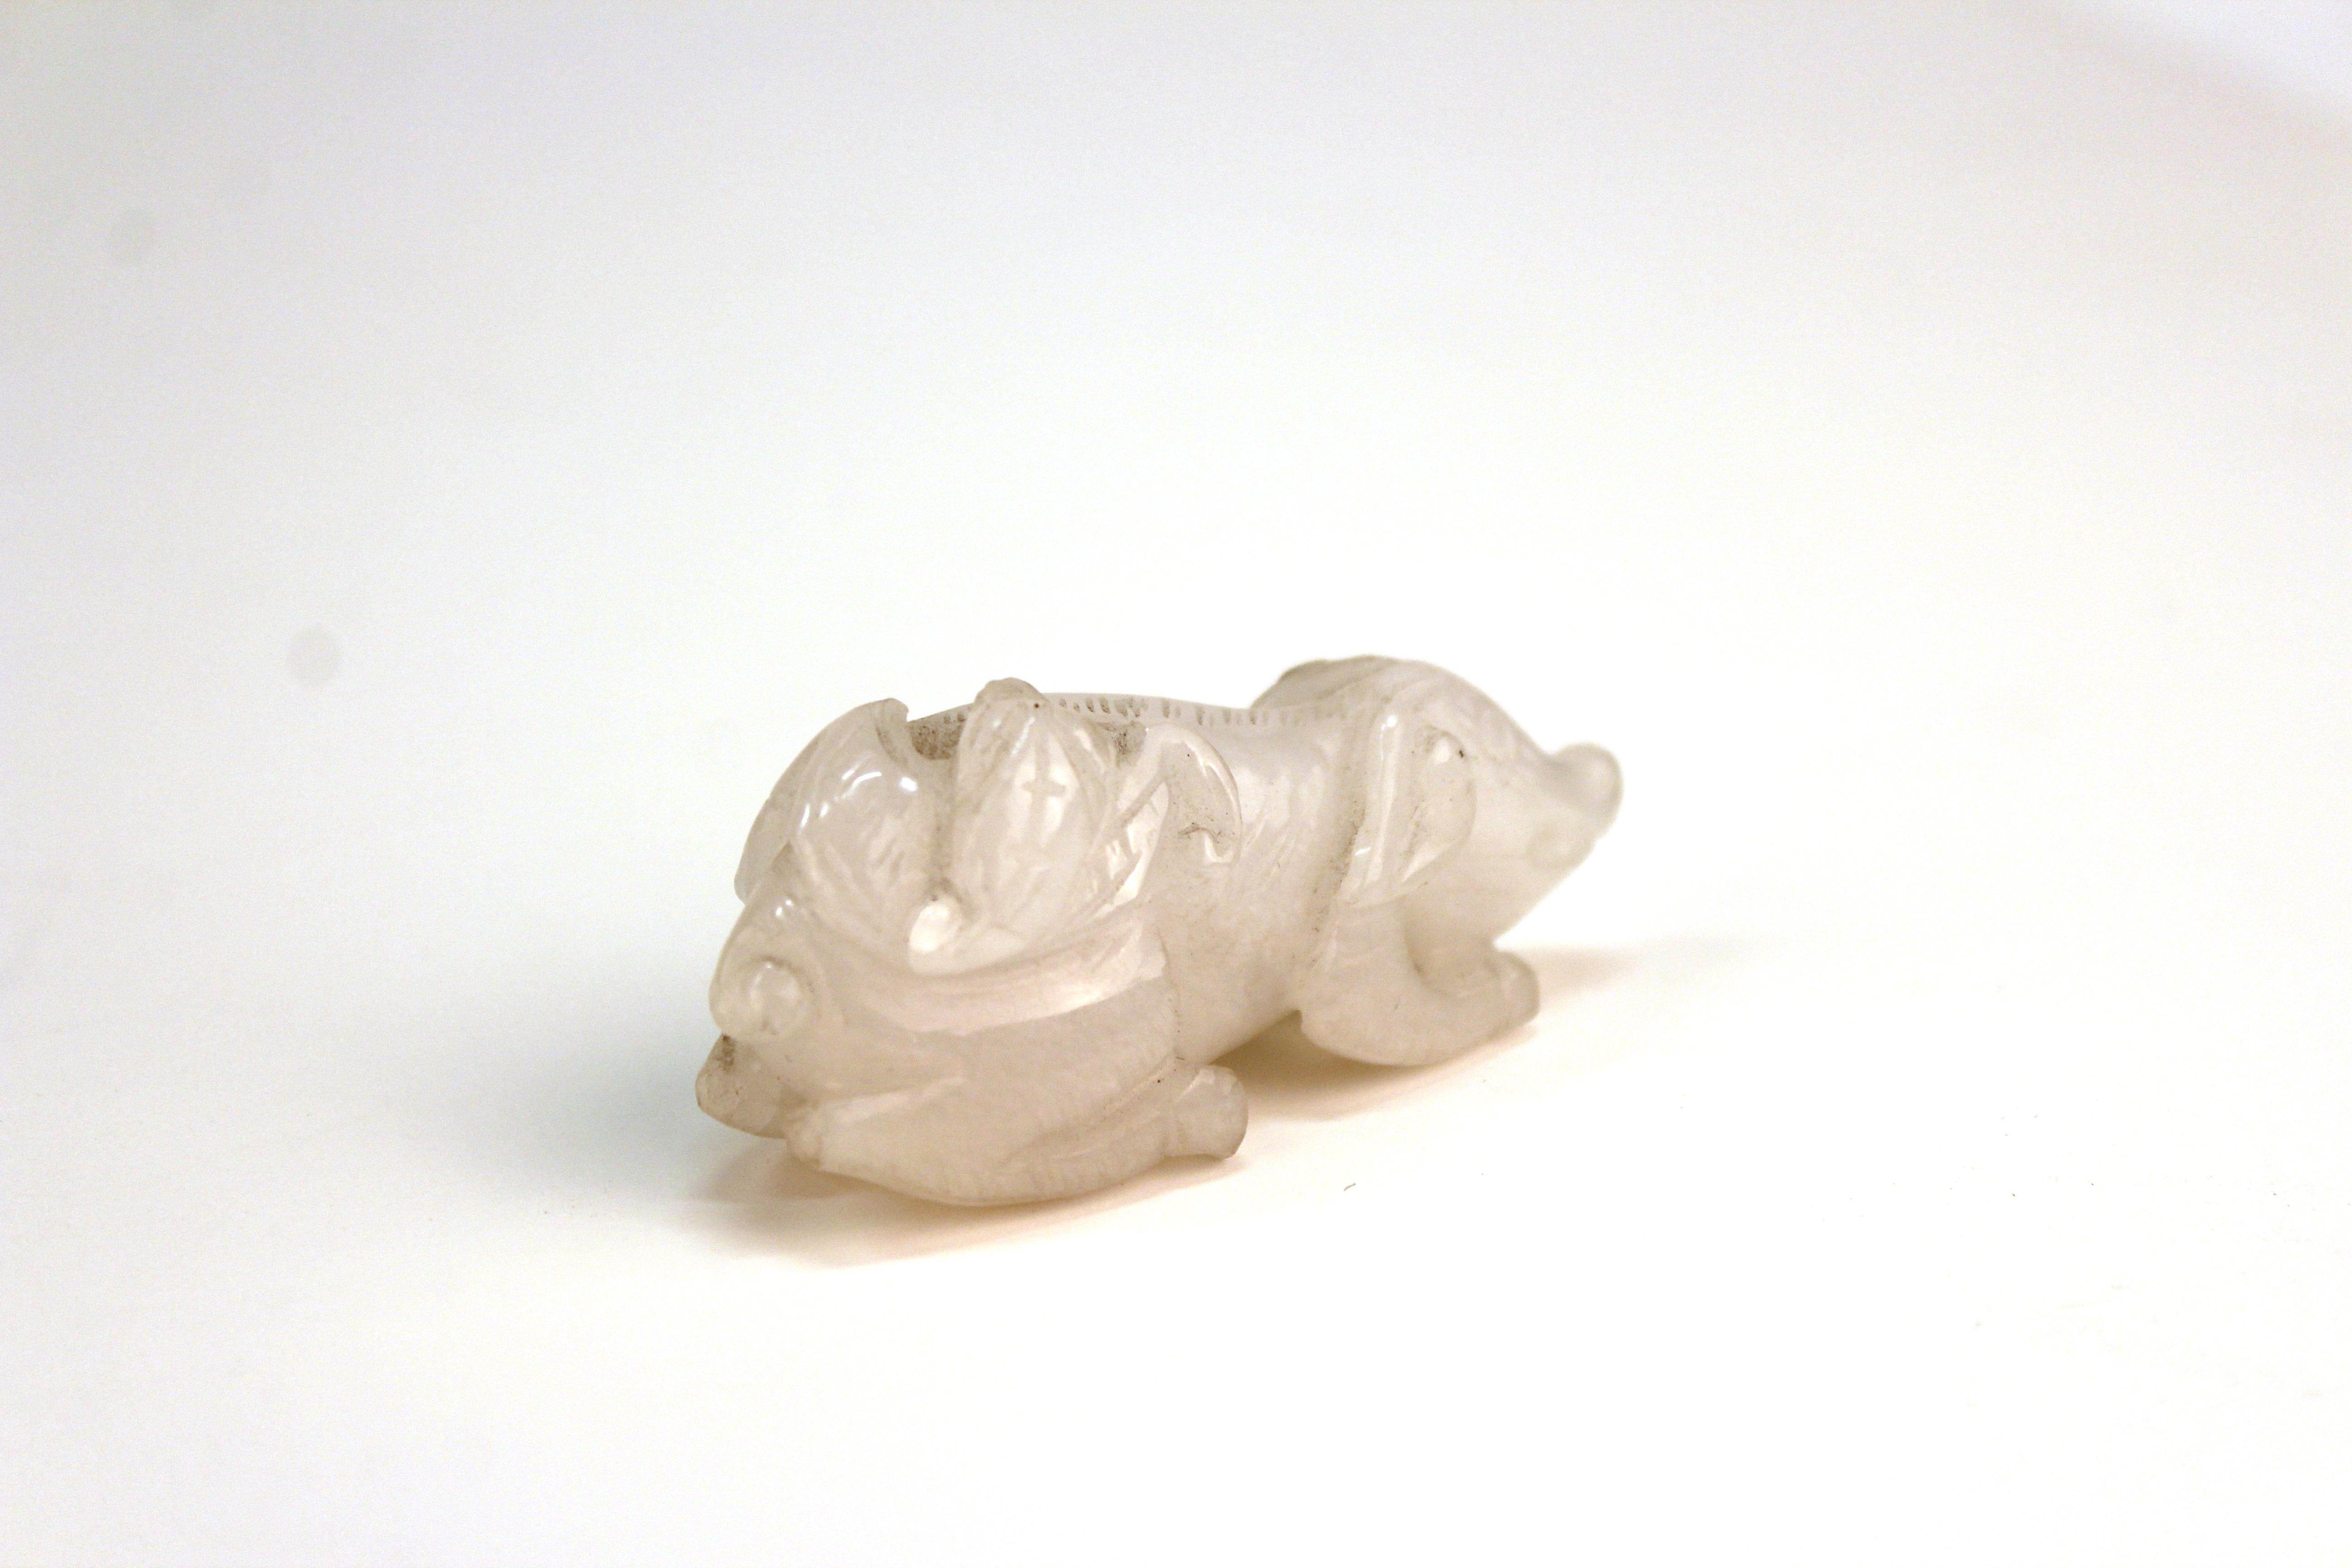 Chinese diminutive sculpture of a small pig with a bat sitting on its back, carved in white jadeite. Can also be worn as an amulet. In good vintage condition.